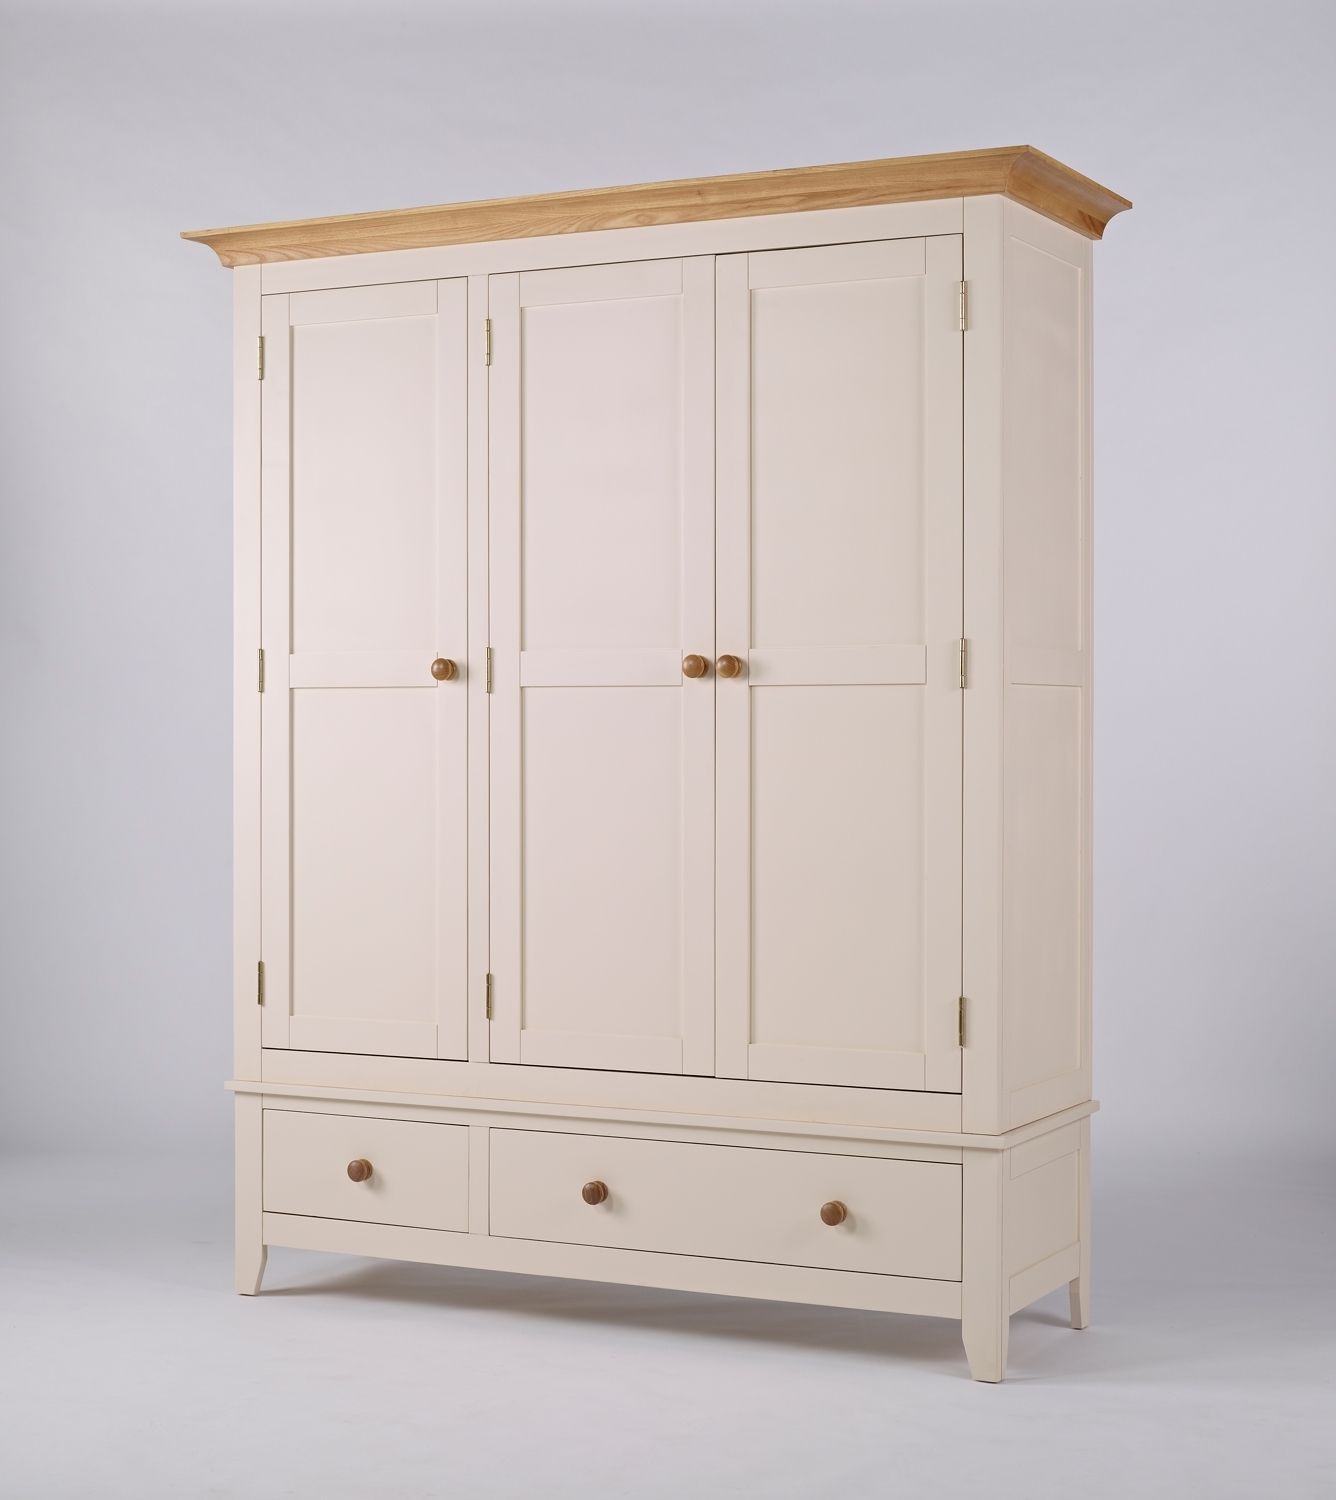 Camden Painted Pine & Ash Triple Wardrobe With Drawers For Famous White Pine Wardrobes (View 3 of 15)